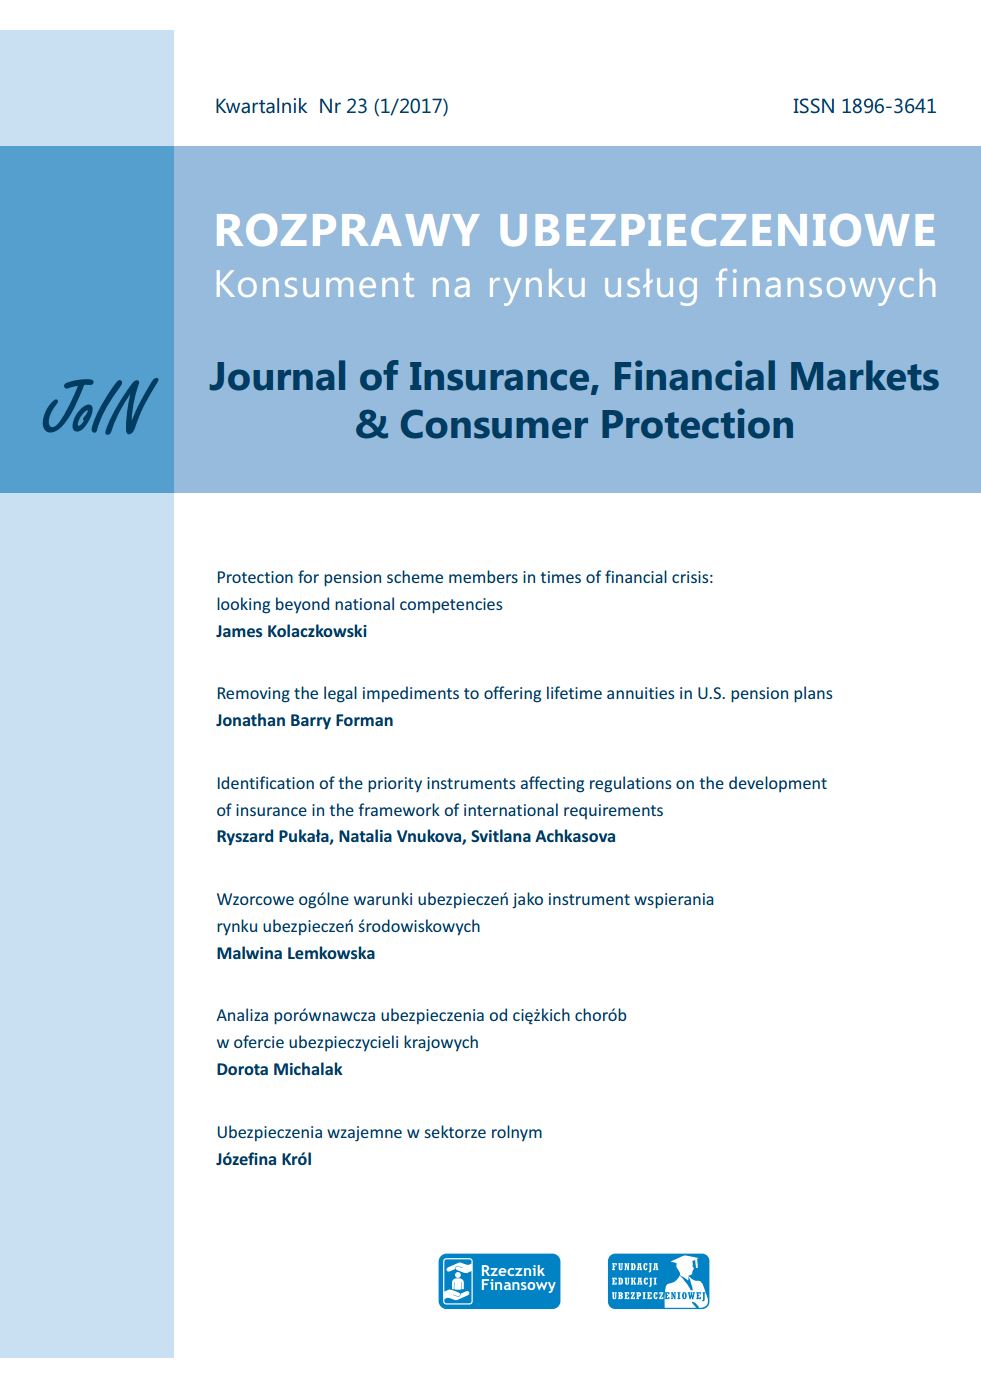 Identification of the priority instruments affecting regulations on the development of insurance in the framework of international requirements Cover Image